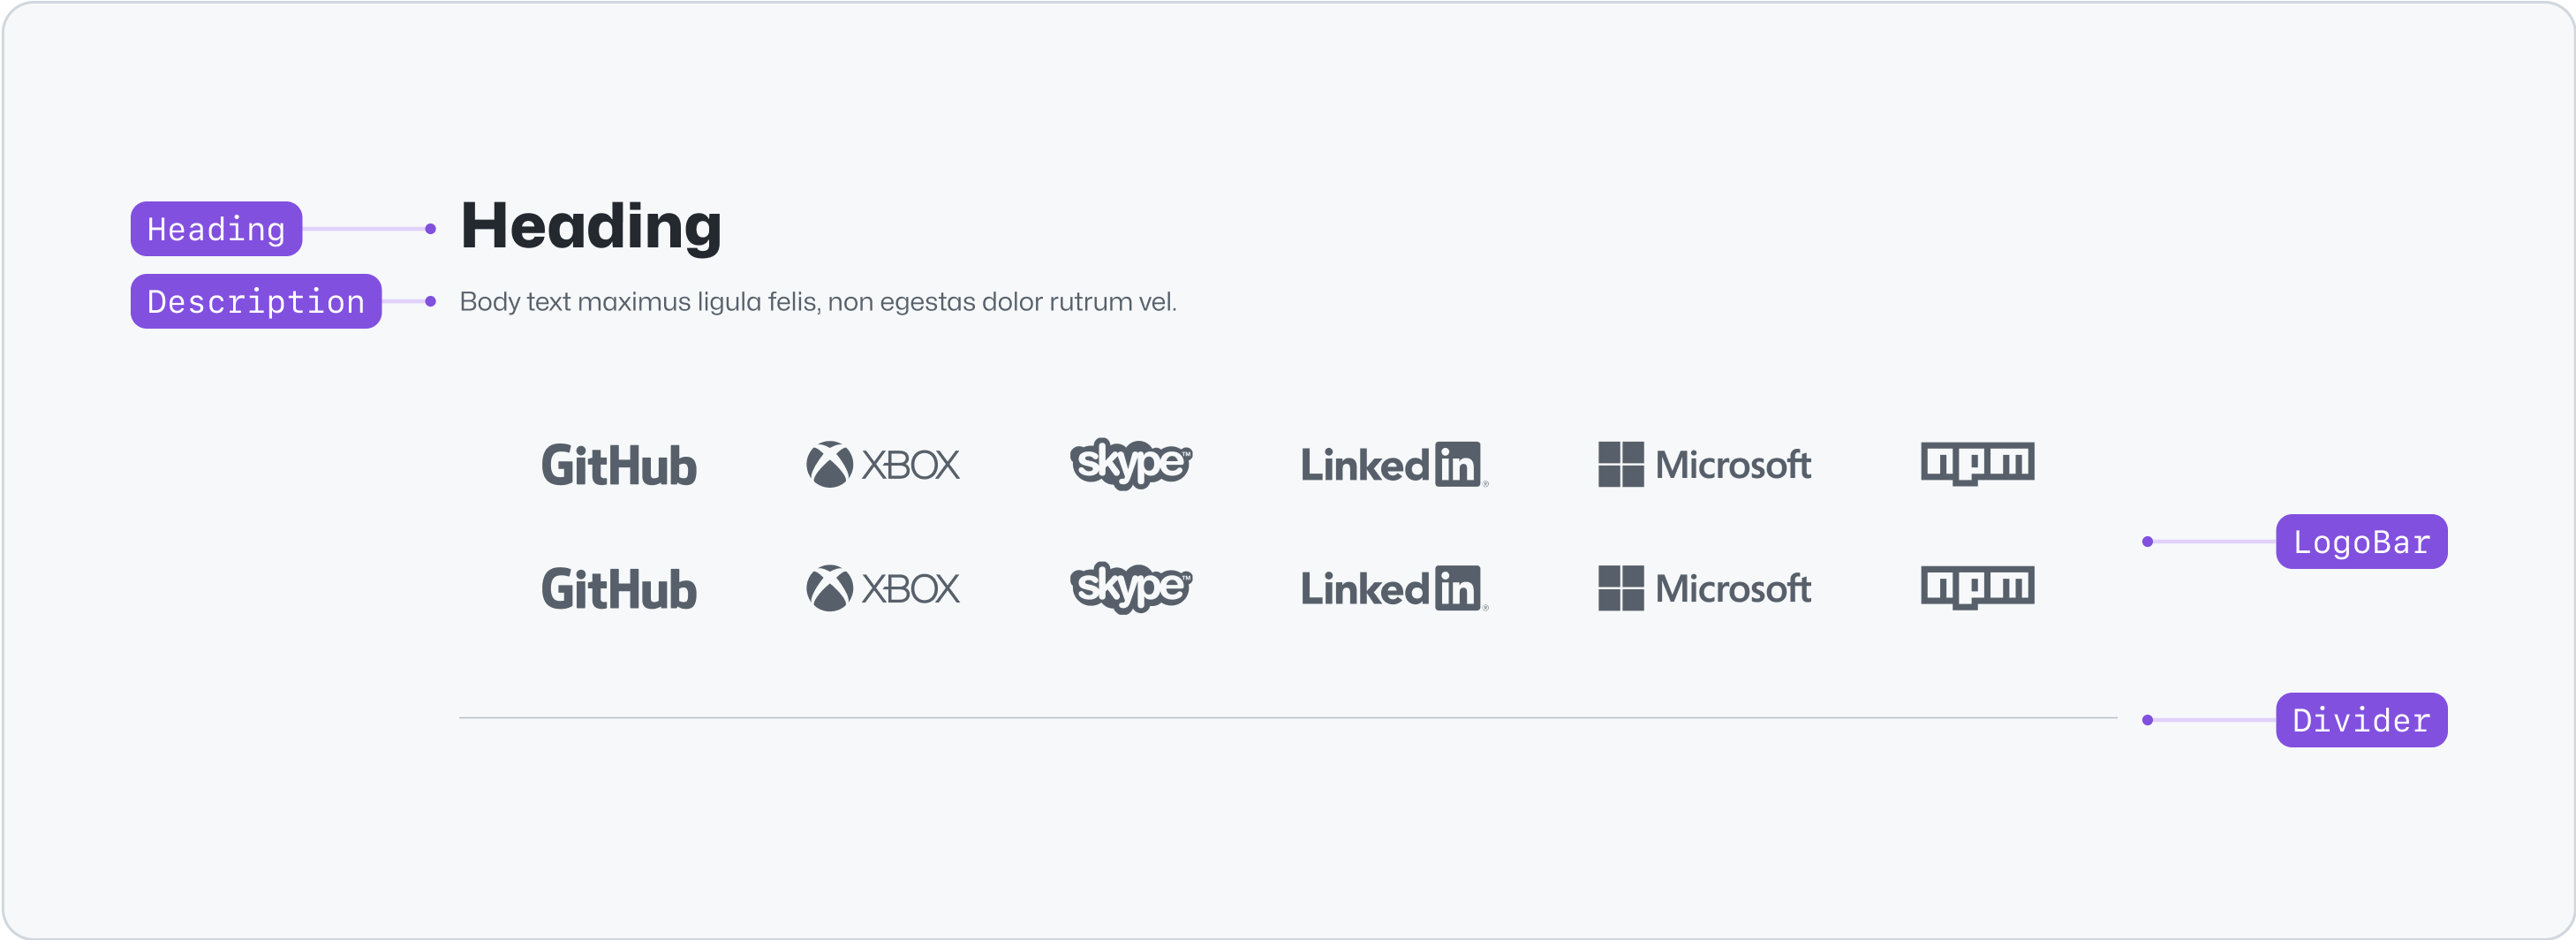 A complete logo suite component, featuring a heading, description and two rows of 6 vendor logos in their default muted colors